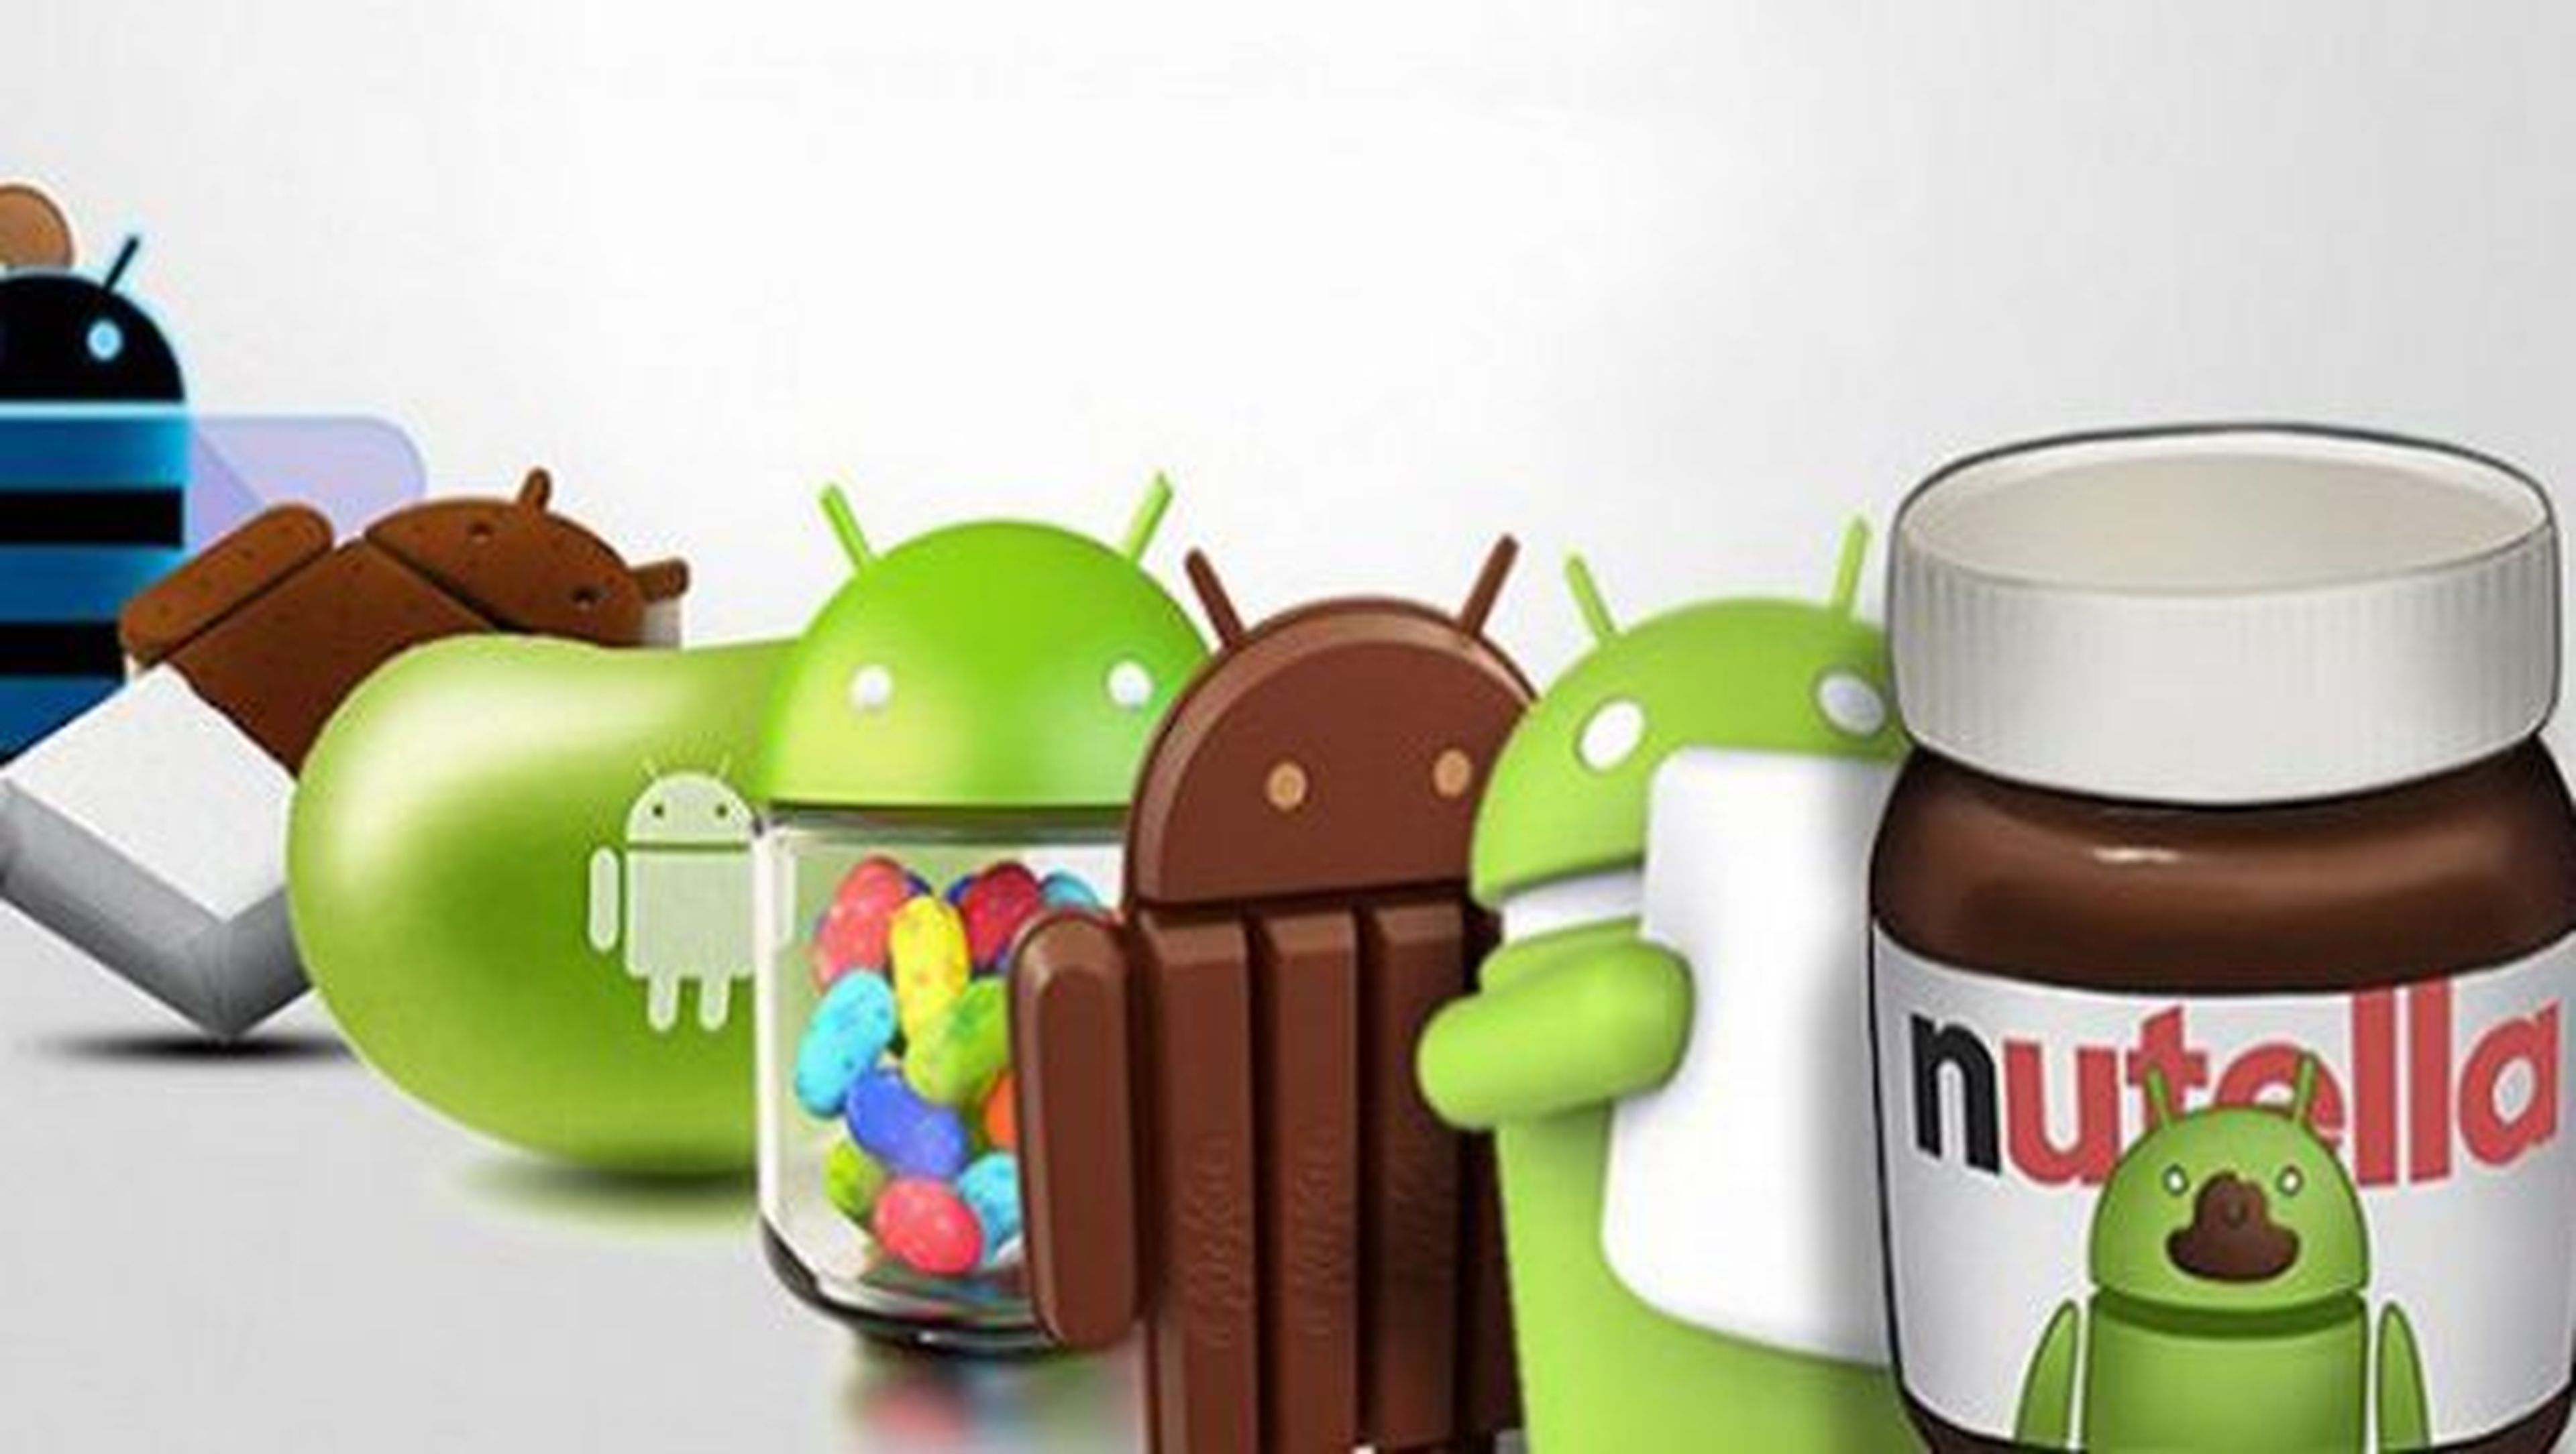 Android Nutella